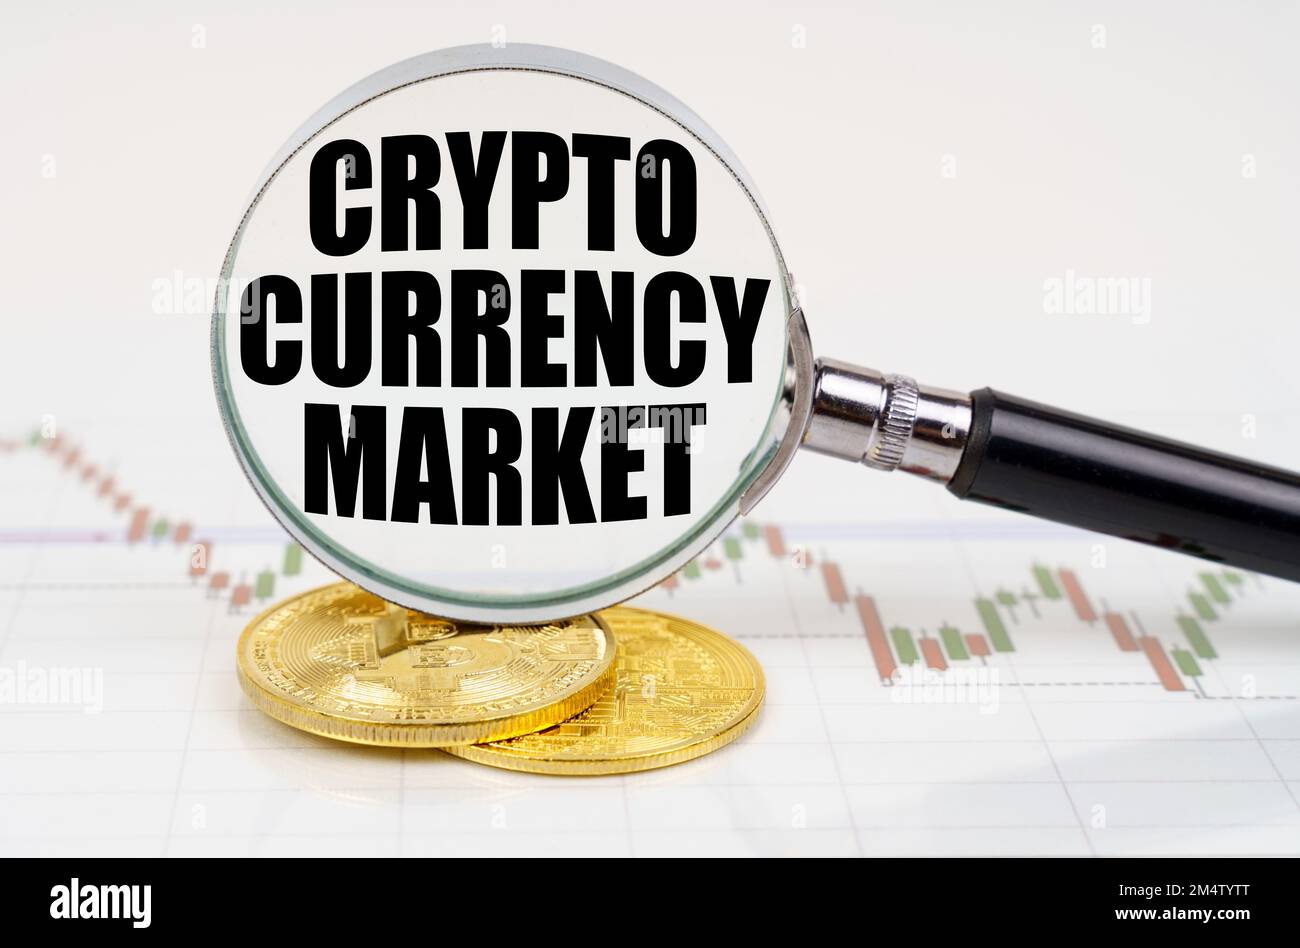 Business and technology concept. On the chart with quotes are bitcoins and there is a magnifying glass with the inscription - Crypto currency market Stock Photo